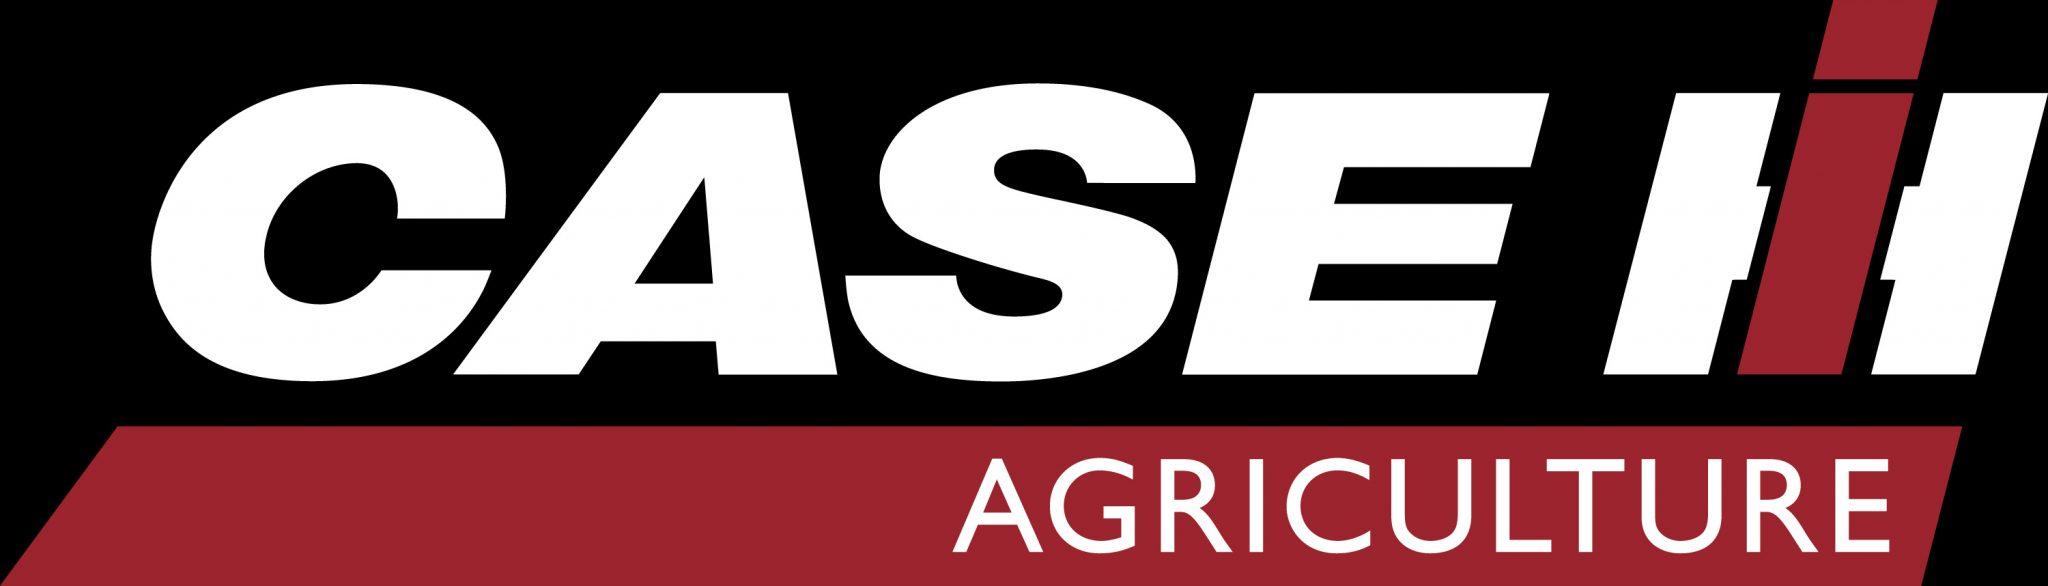 Case Agriculture Logo - Agriculture | Hartwigs | CASE IH | Balers, Combines, Headers Fronts ...